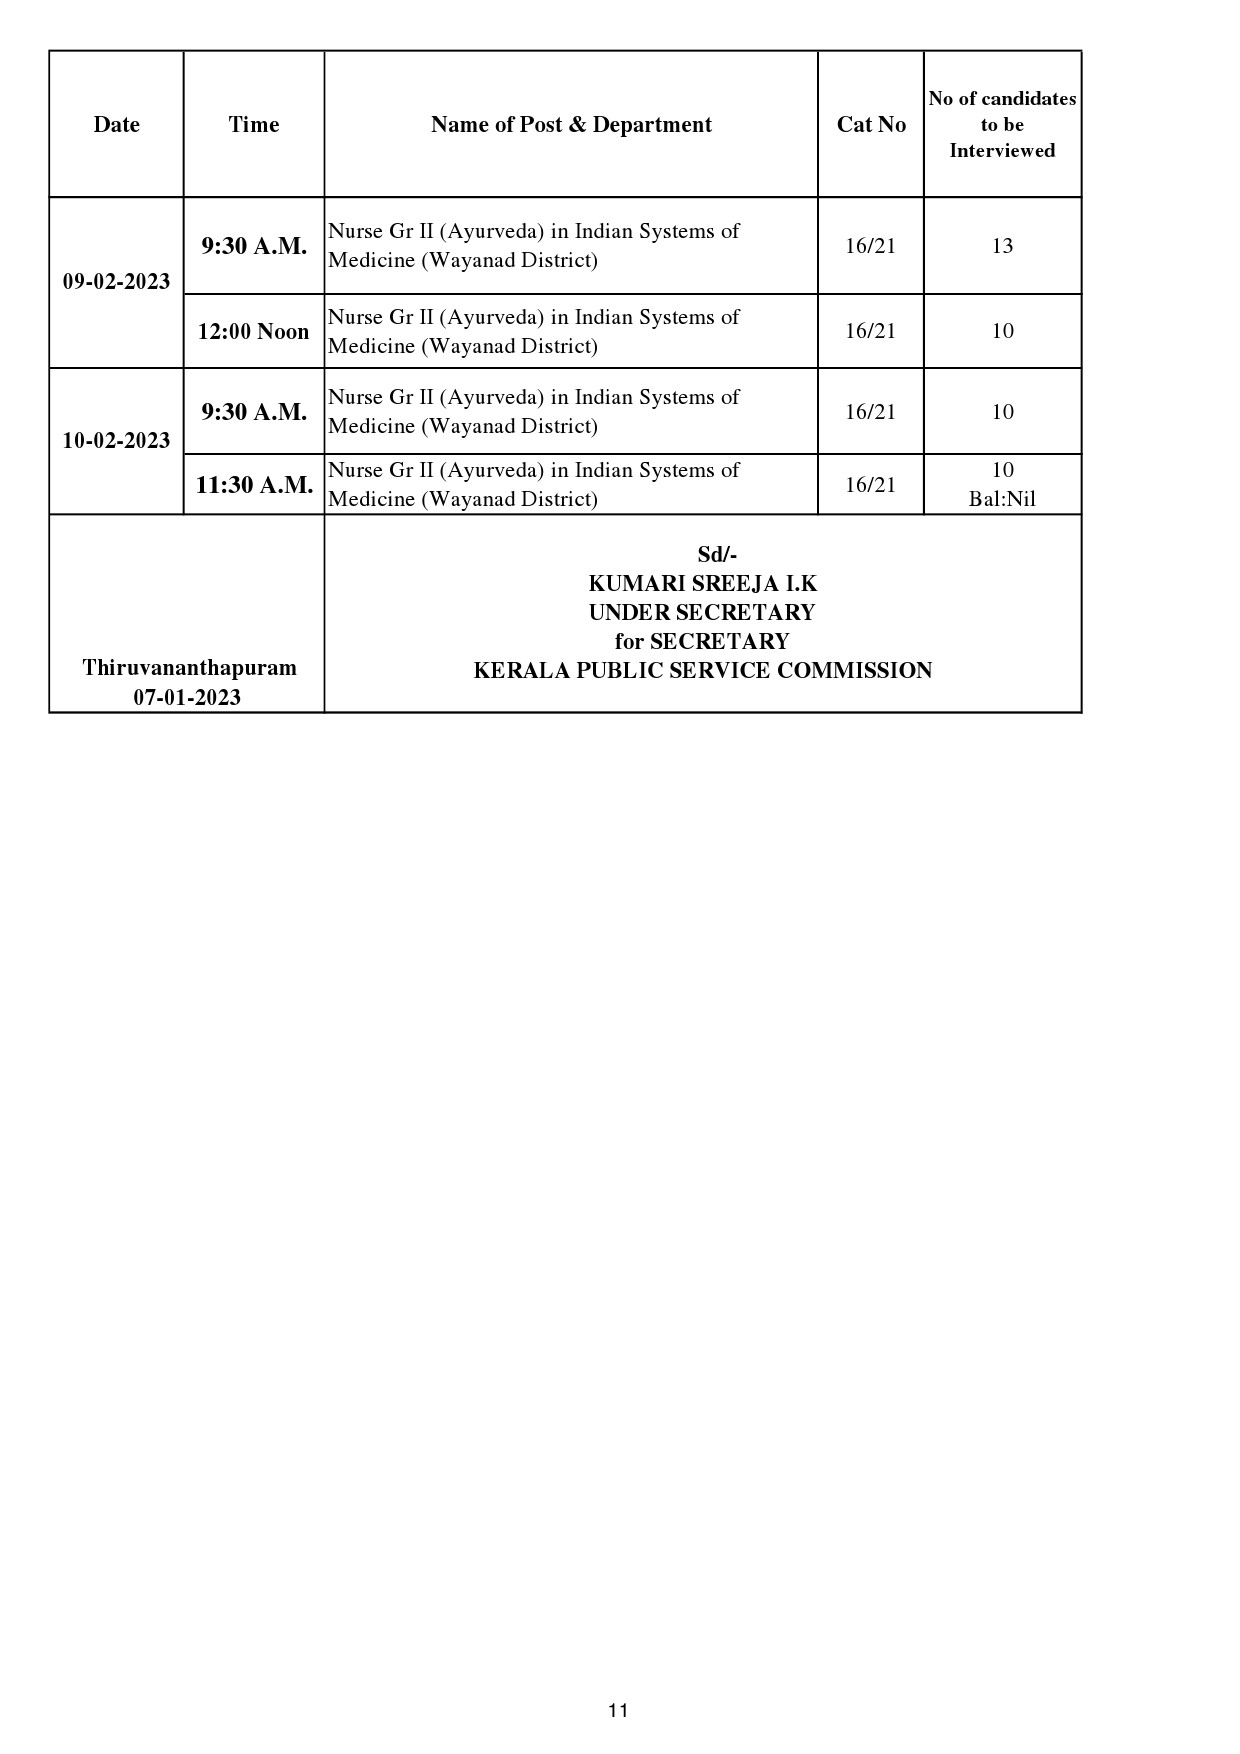 KPSC Interview Programme For The Month Of February 2023 - Notification Image 11